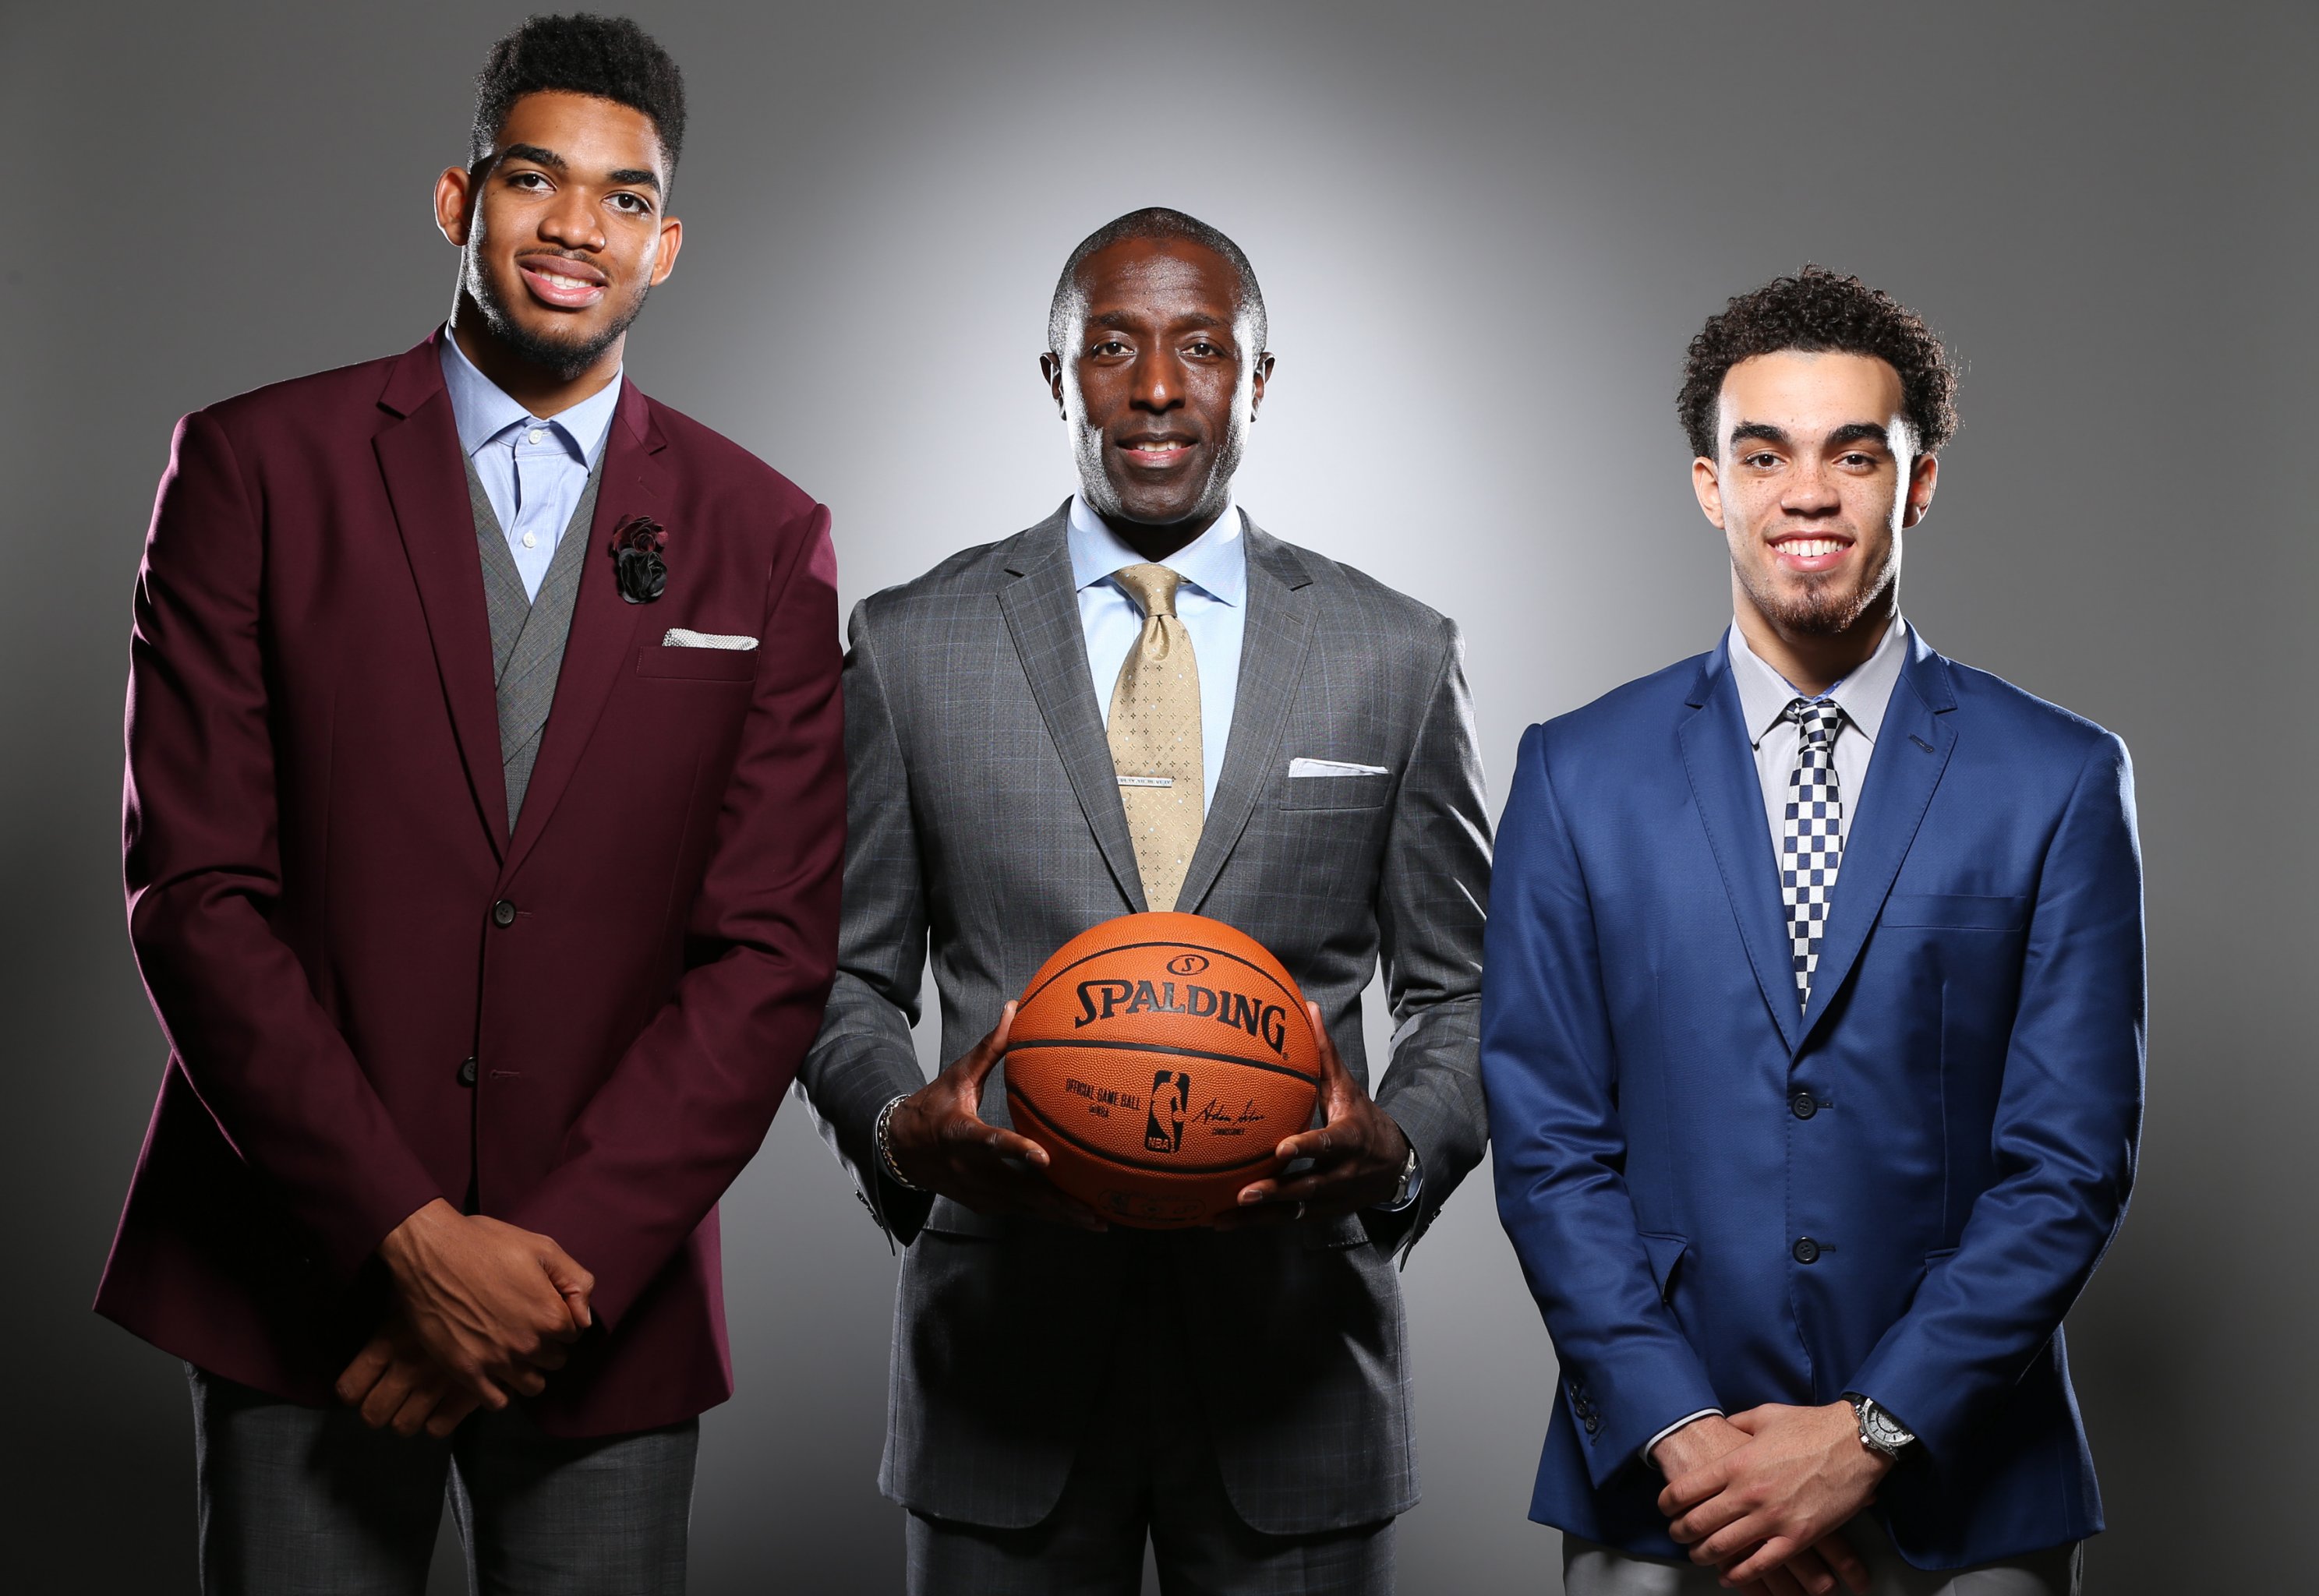 Landry Fields' journey: From player to scout to assistant GM in four years